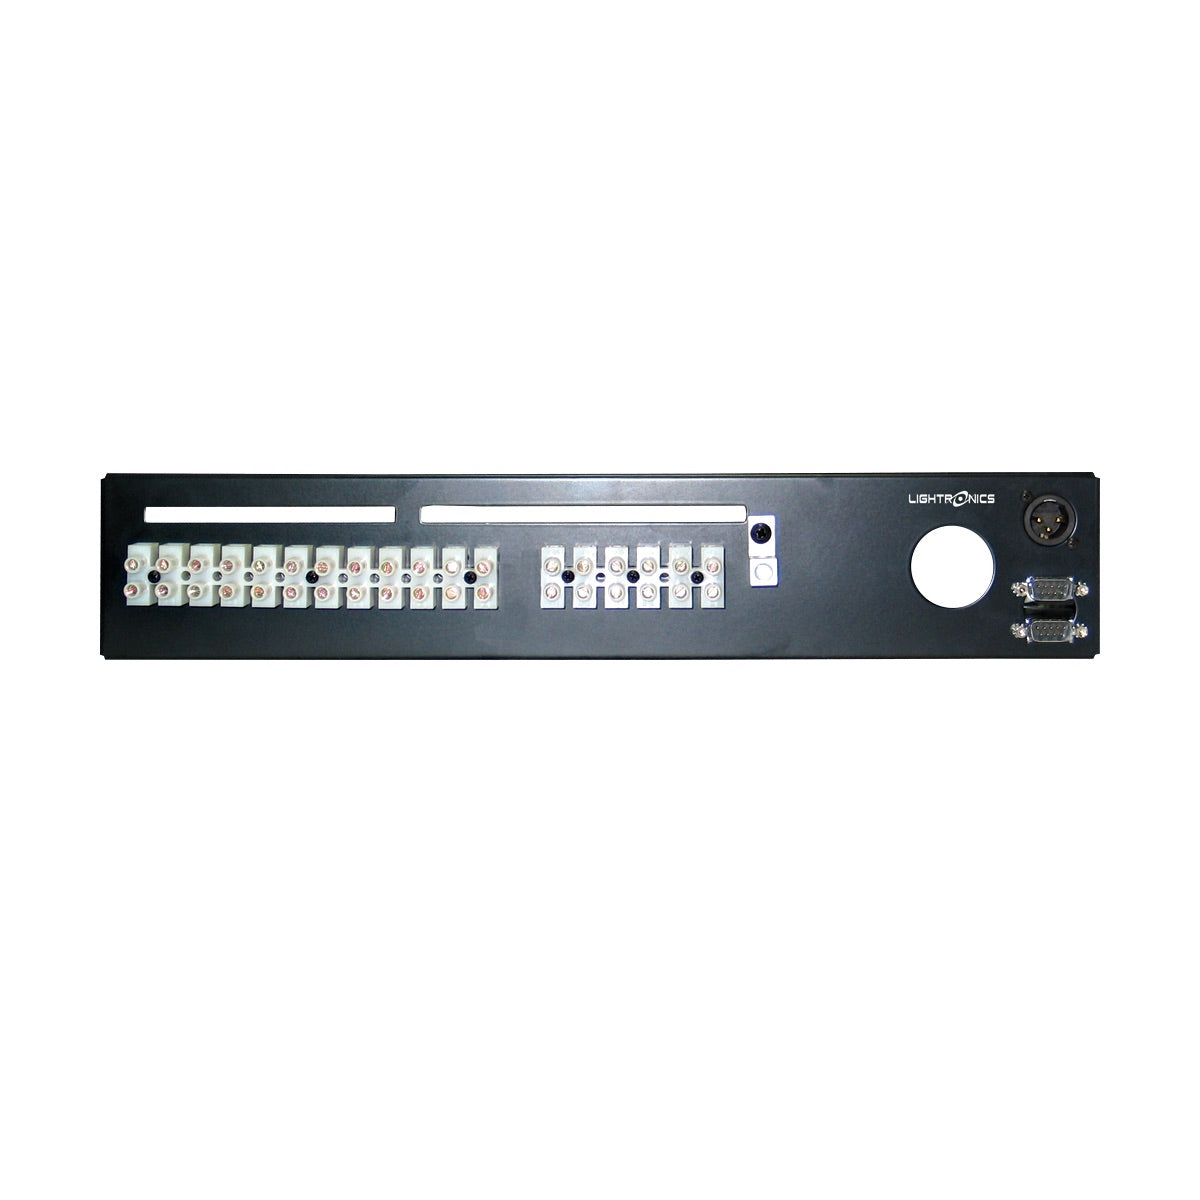 Lightronics RE121D Rack Mount Dimmer, RE Series, rear Terminal/Barrier Connector Strip with Knockout Cover